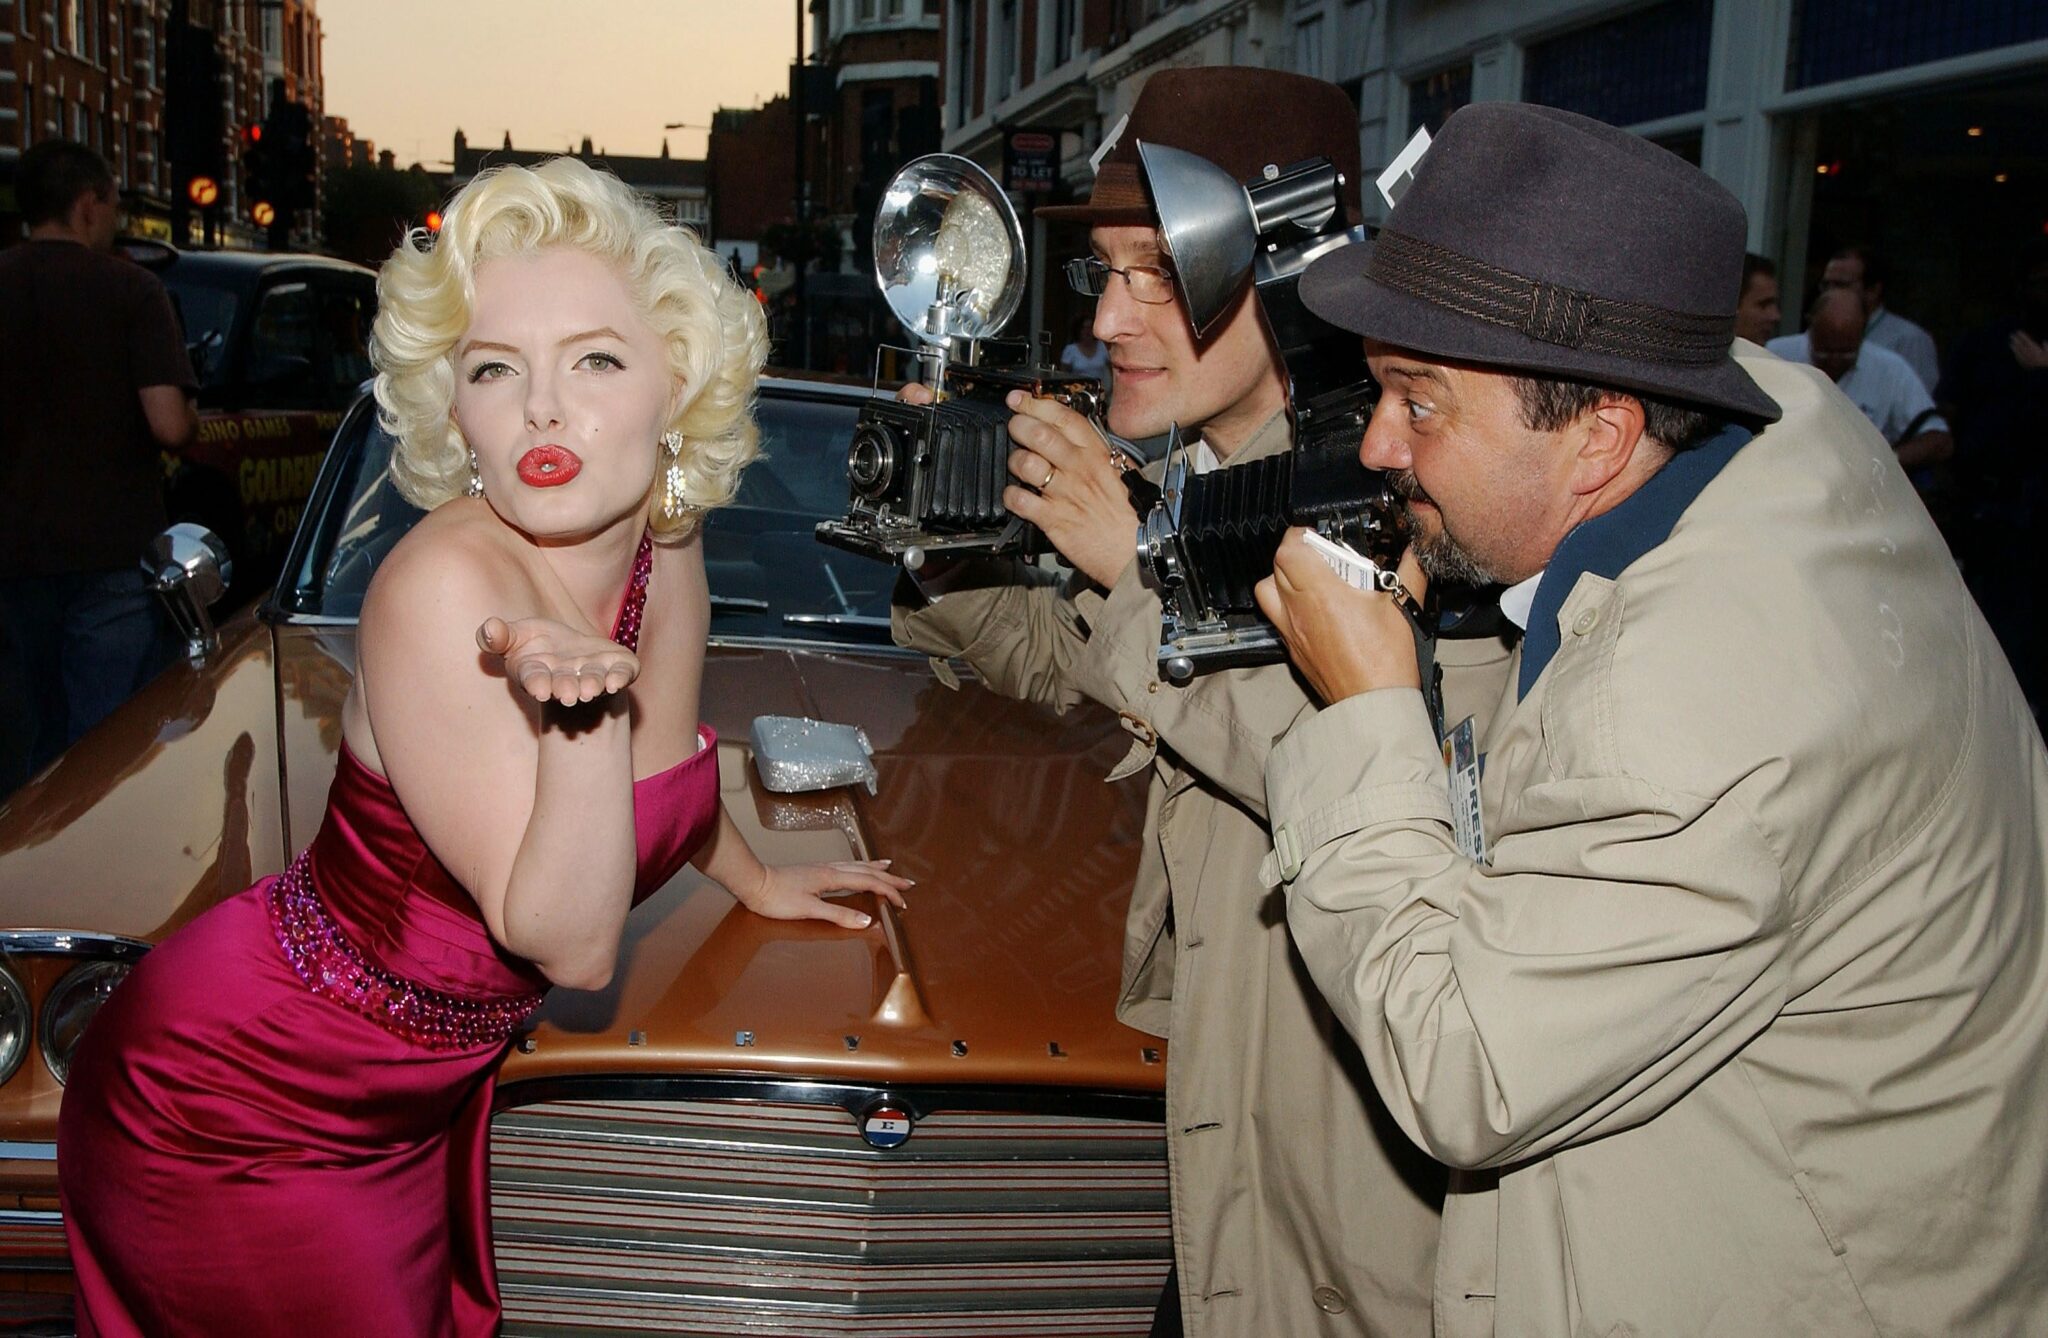 Image of a lady dressed up as Marylin Monroe and two men dressed up as photographers taking pictures of her